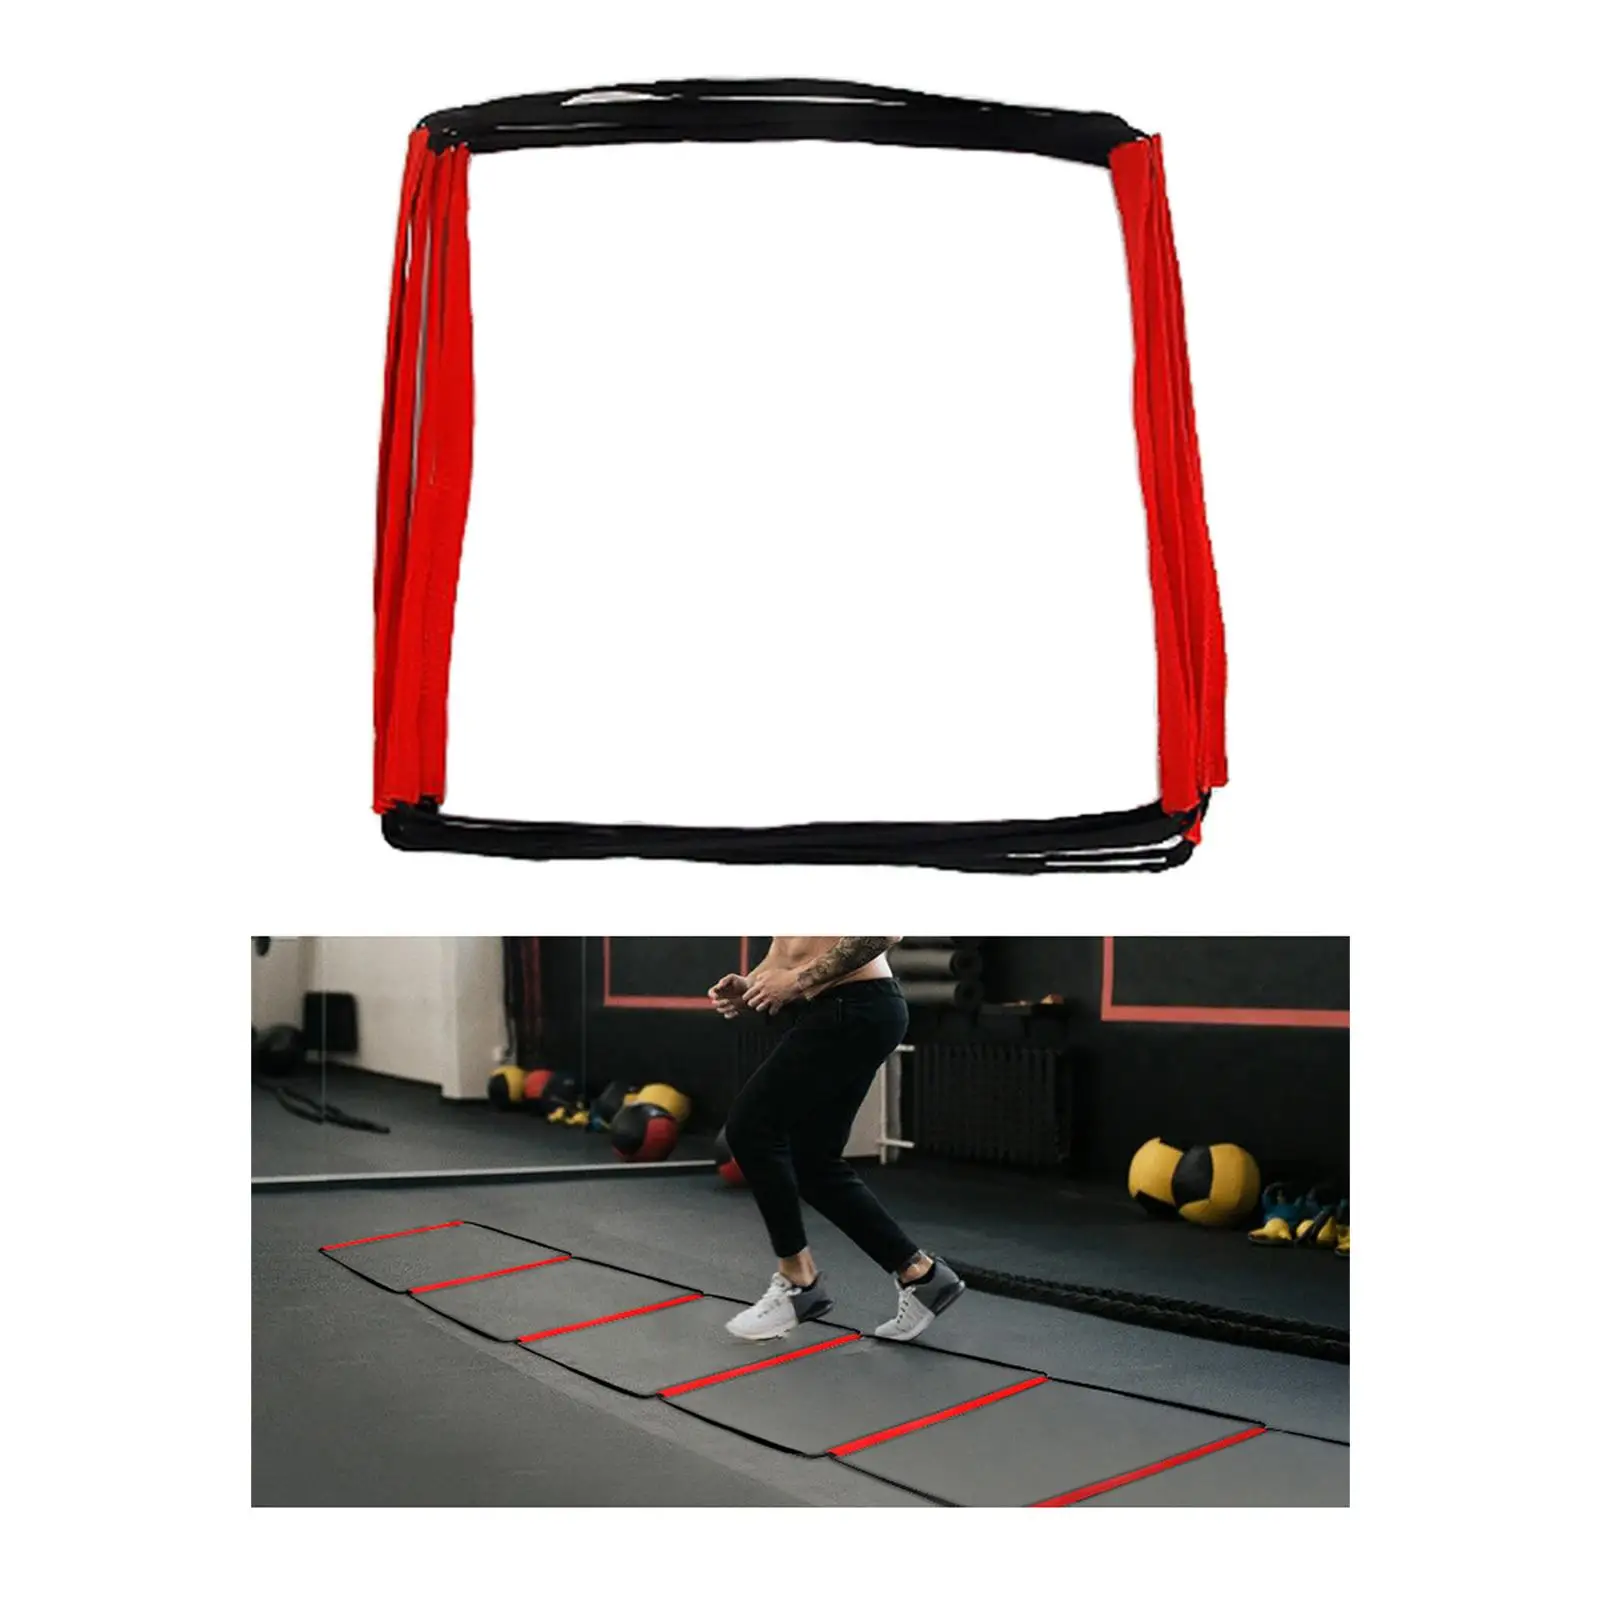  Agility  Ladder Flexible Jumping Hurdles  Stairs Adjustable Set for Coordination Footwork Kids Athletes Rugby